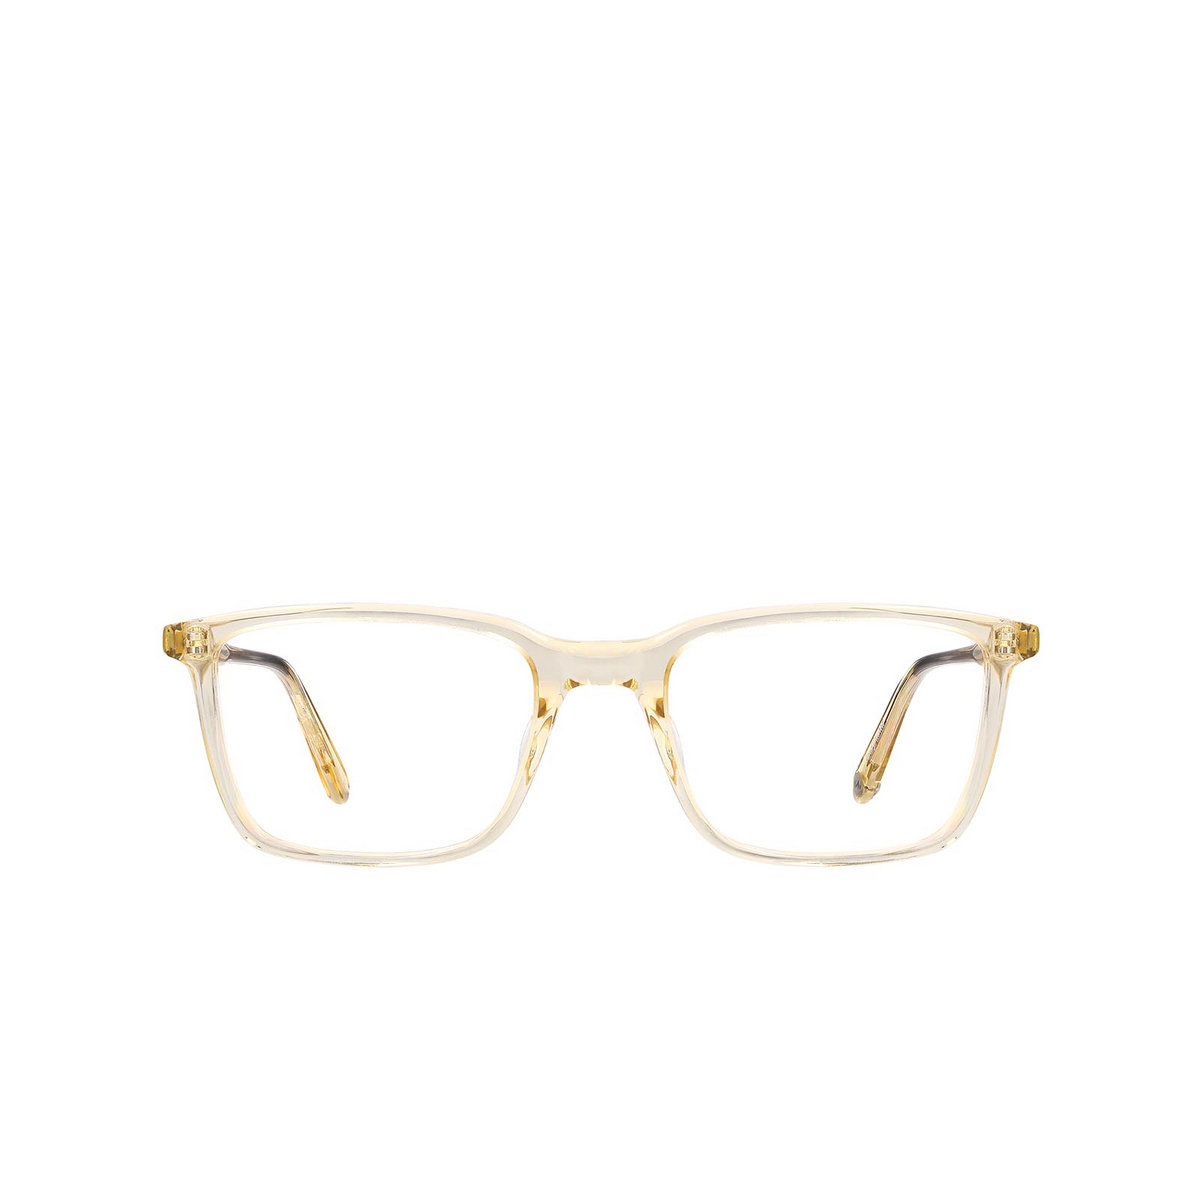 Garrett Leight MARCO Eyeglasses CH Champagne - front view